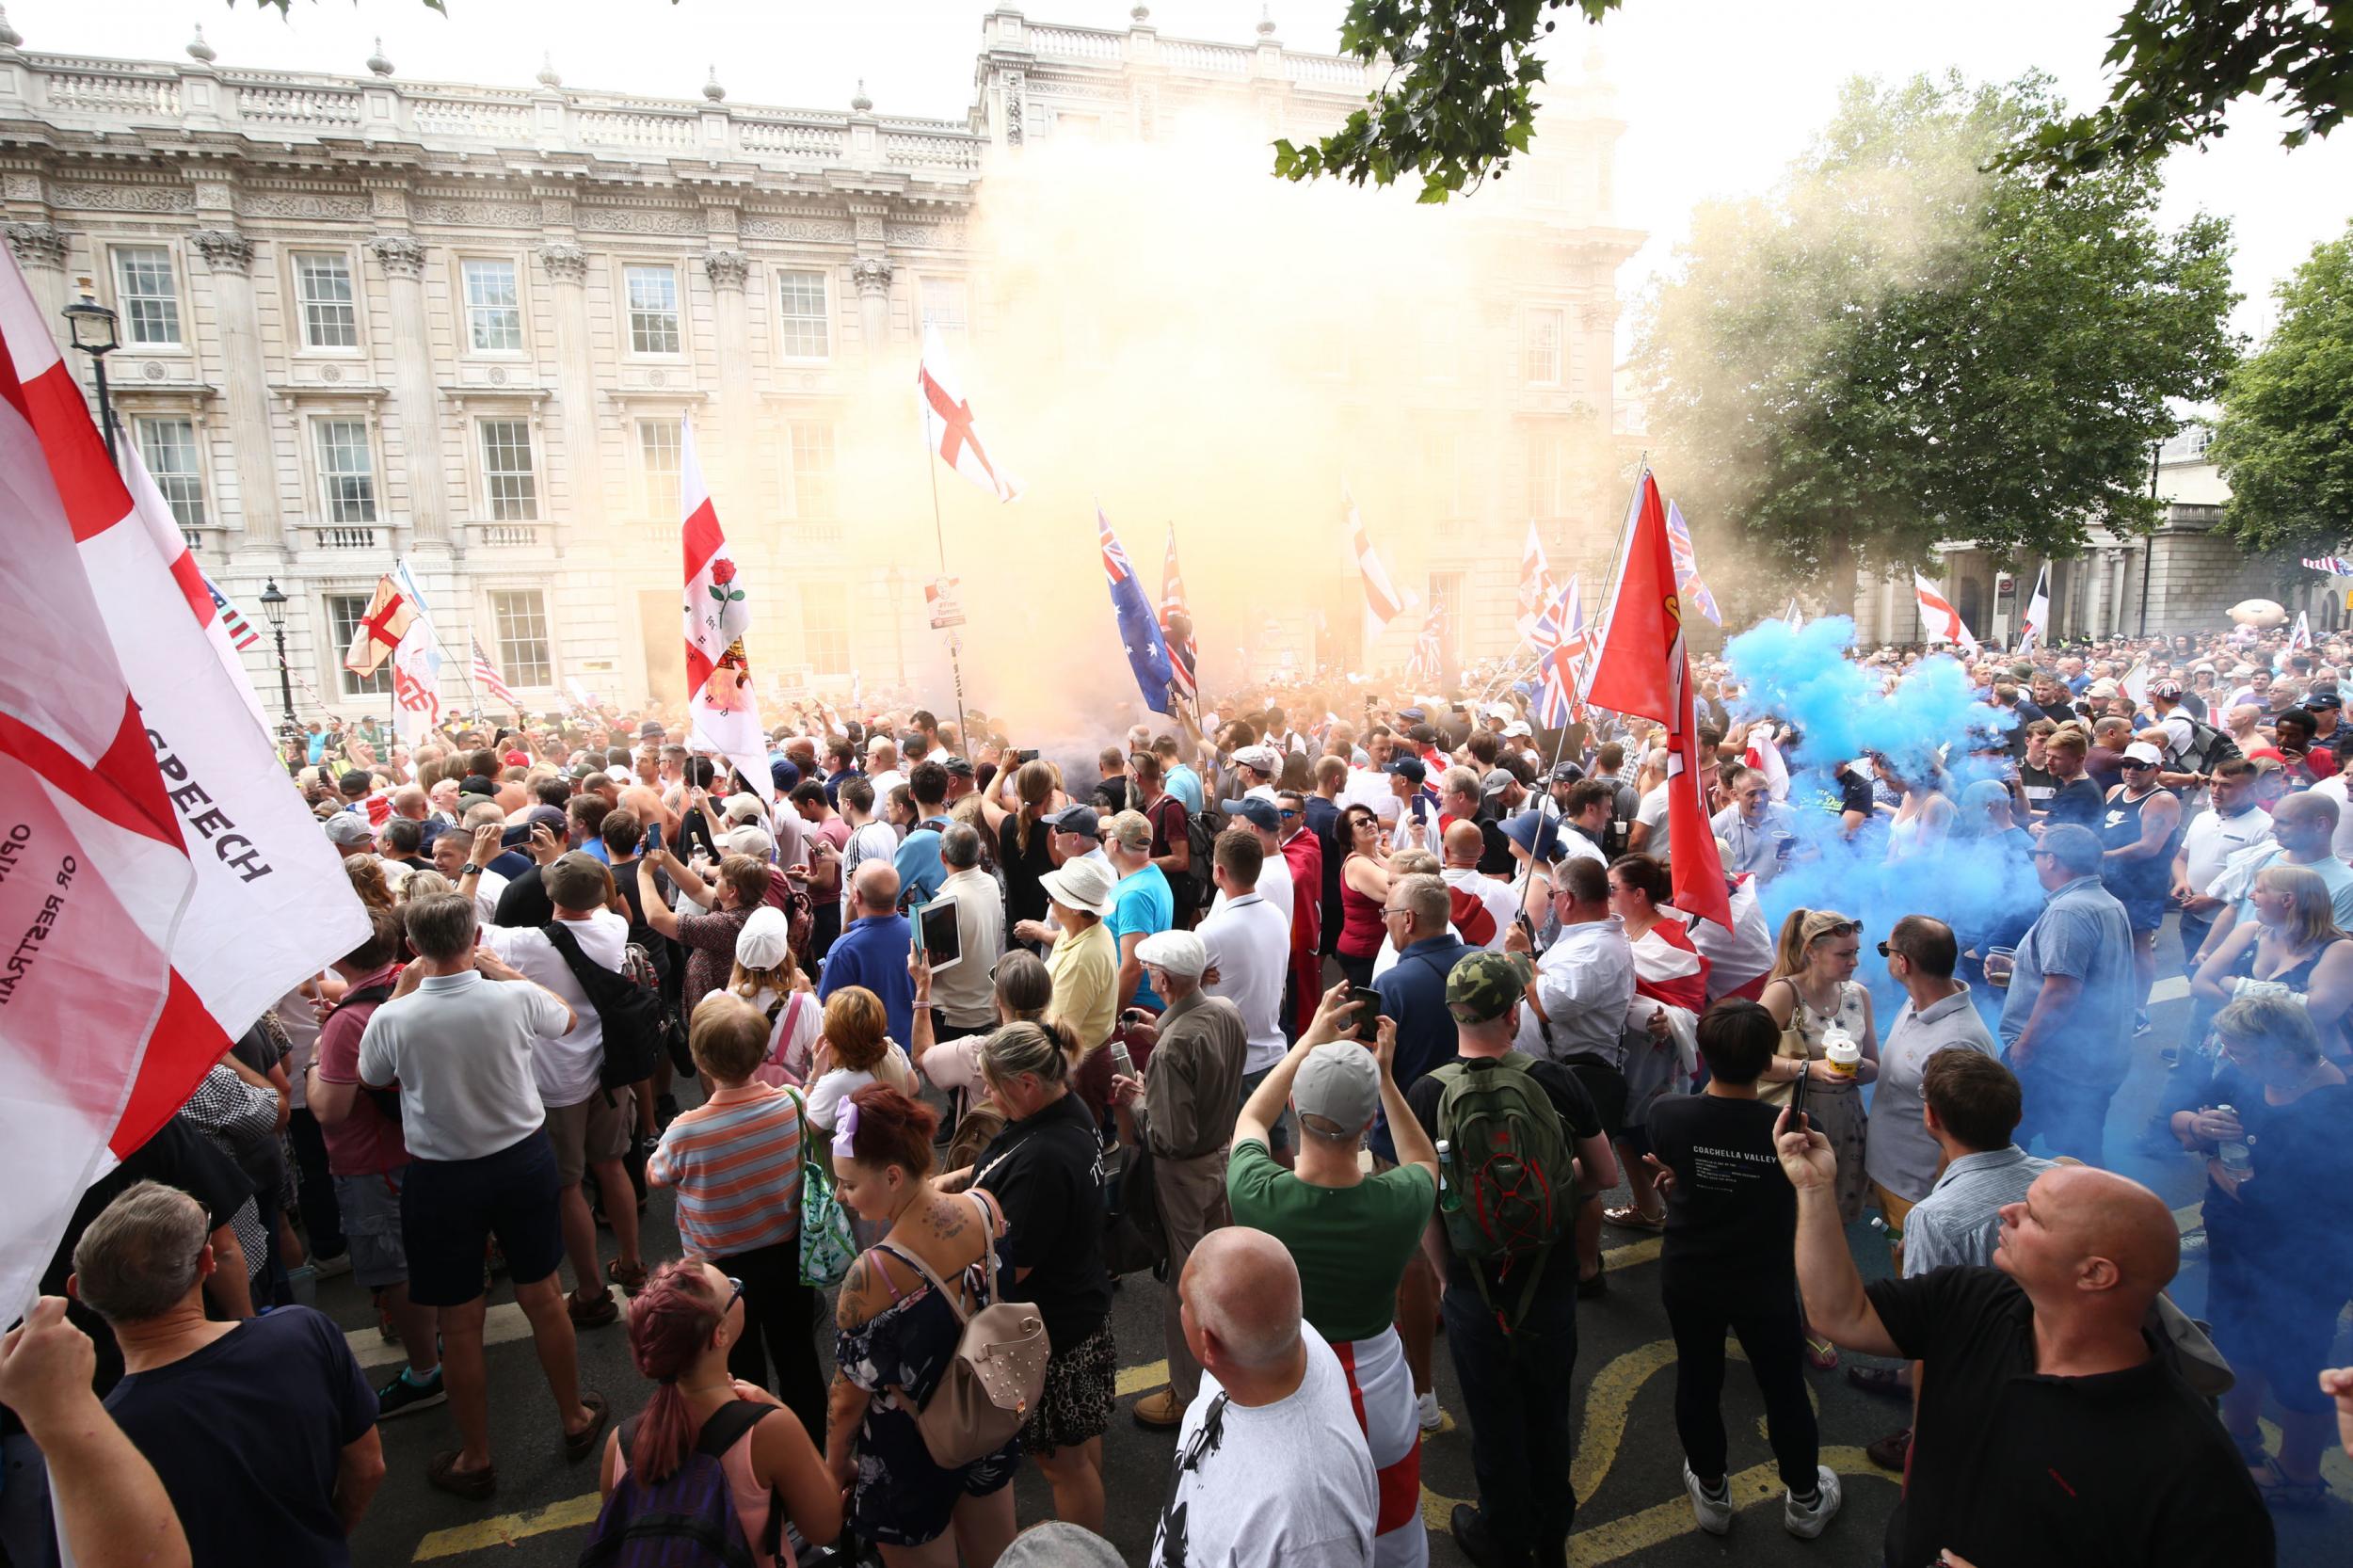 Free Tommy Robinson supporters and Pro-Trump supporters come together on Whitehall, London